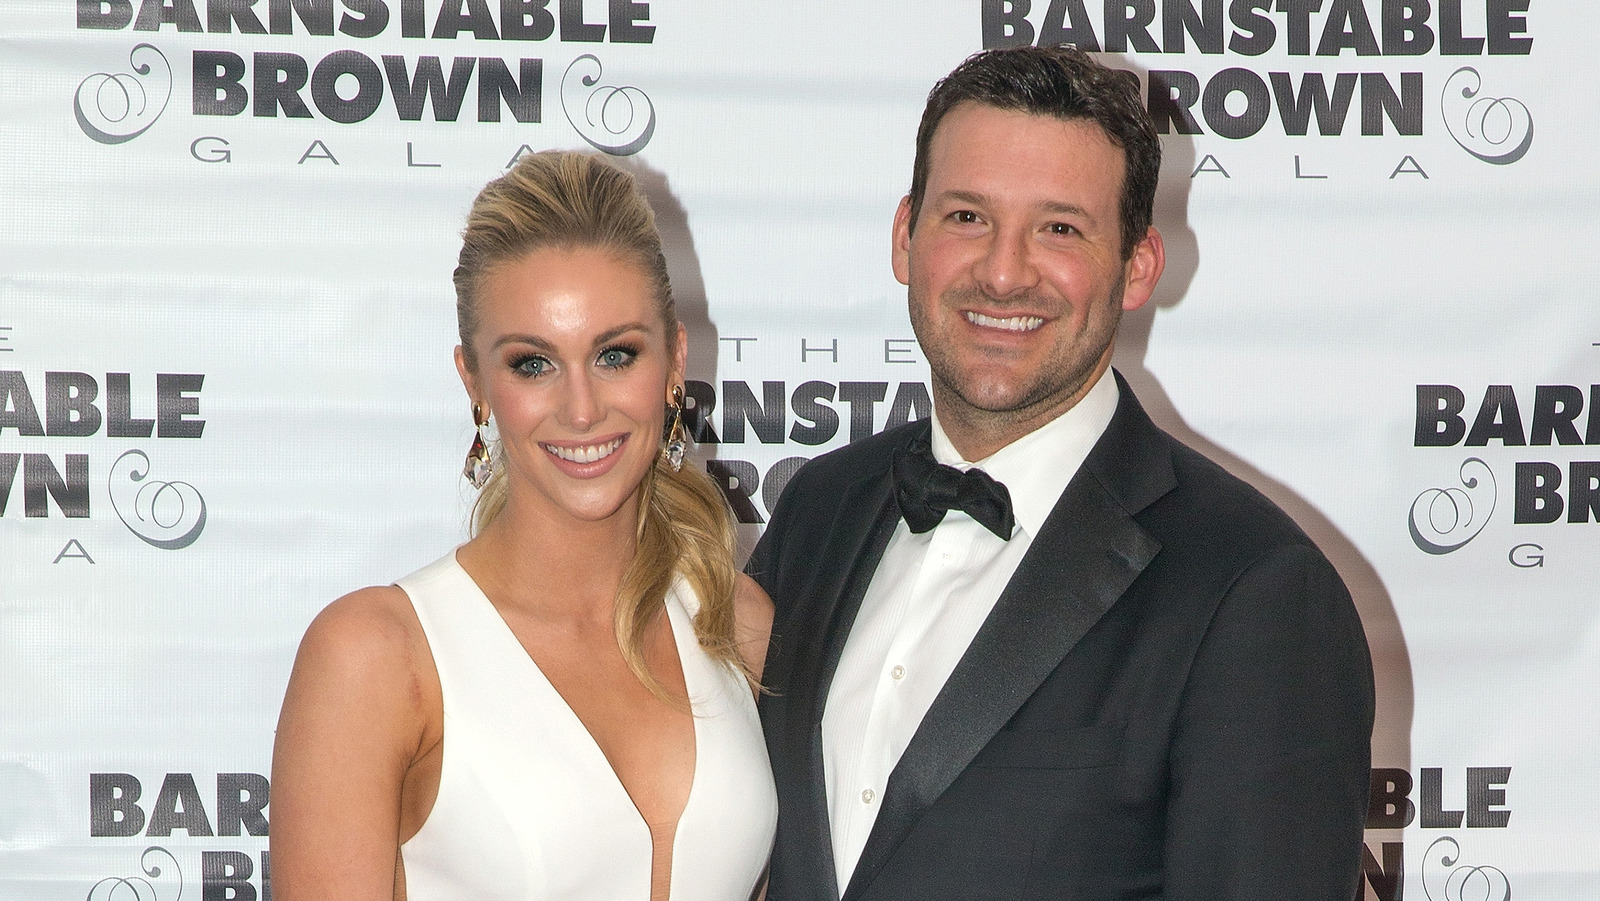 Inside Tony Romo's Relationship With His Wife